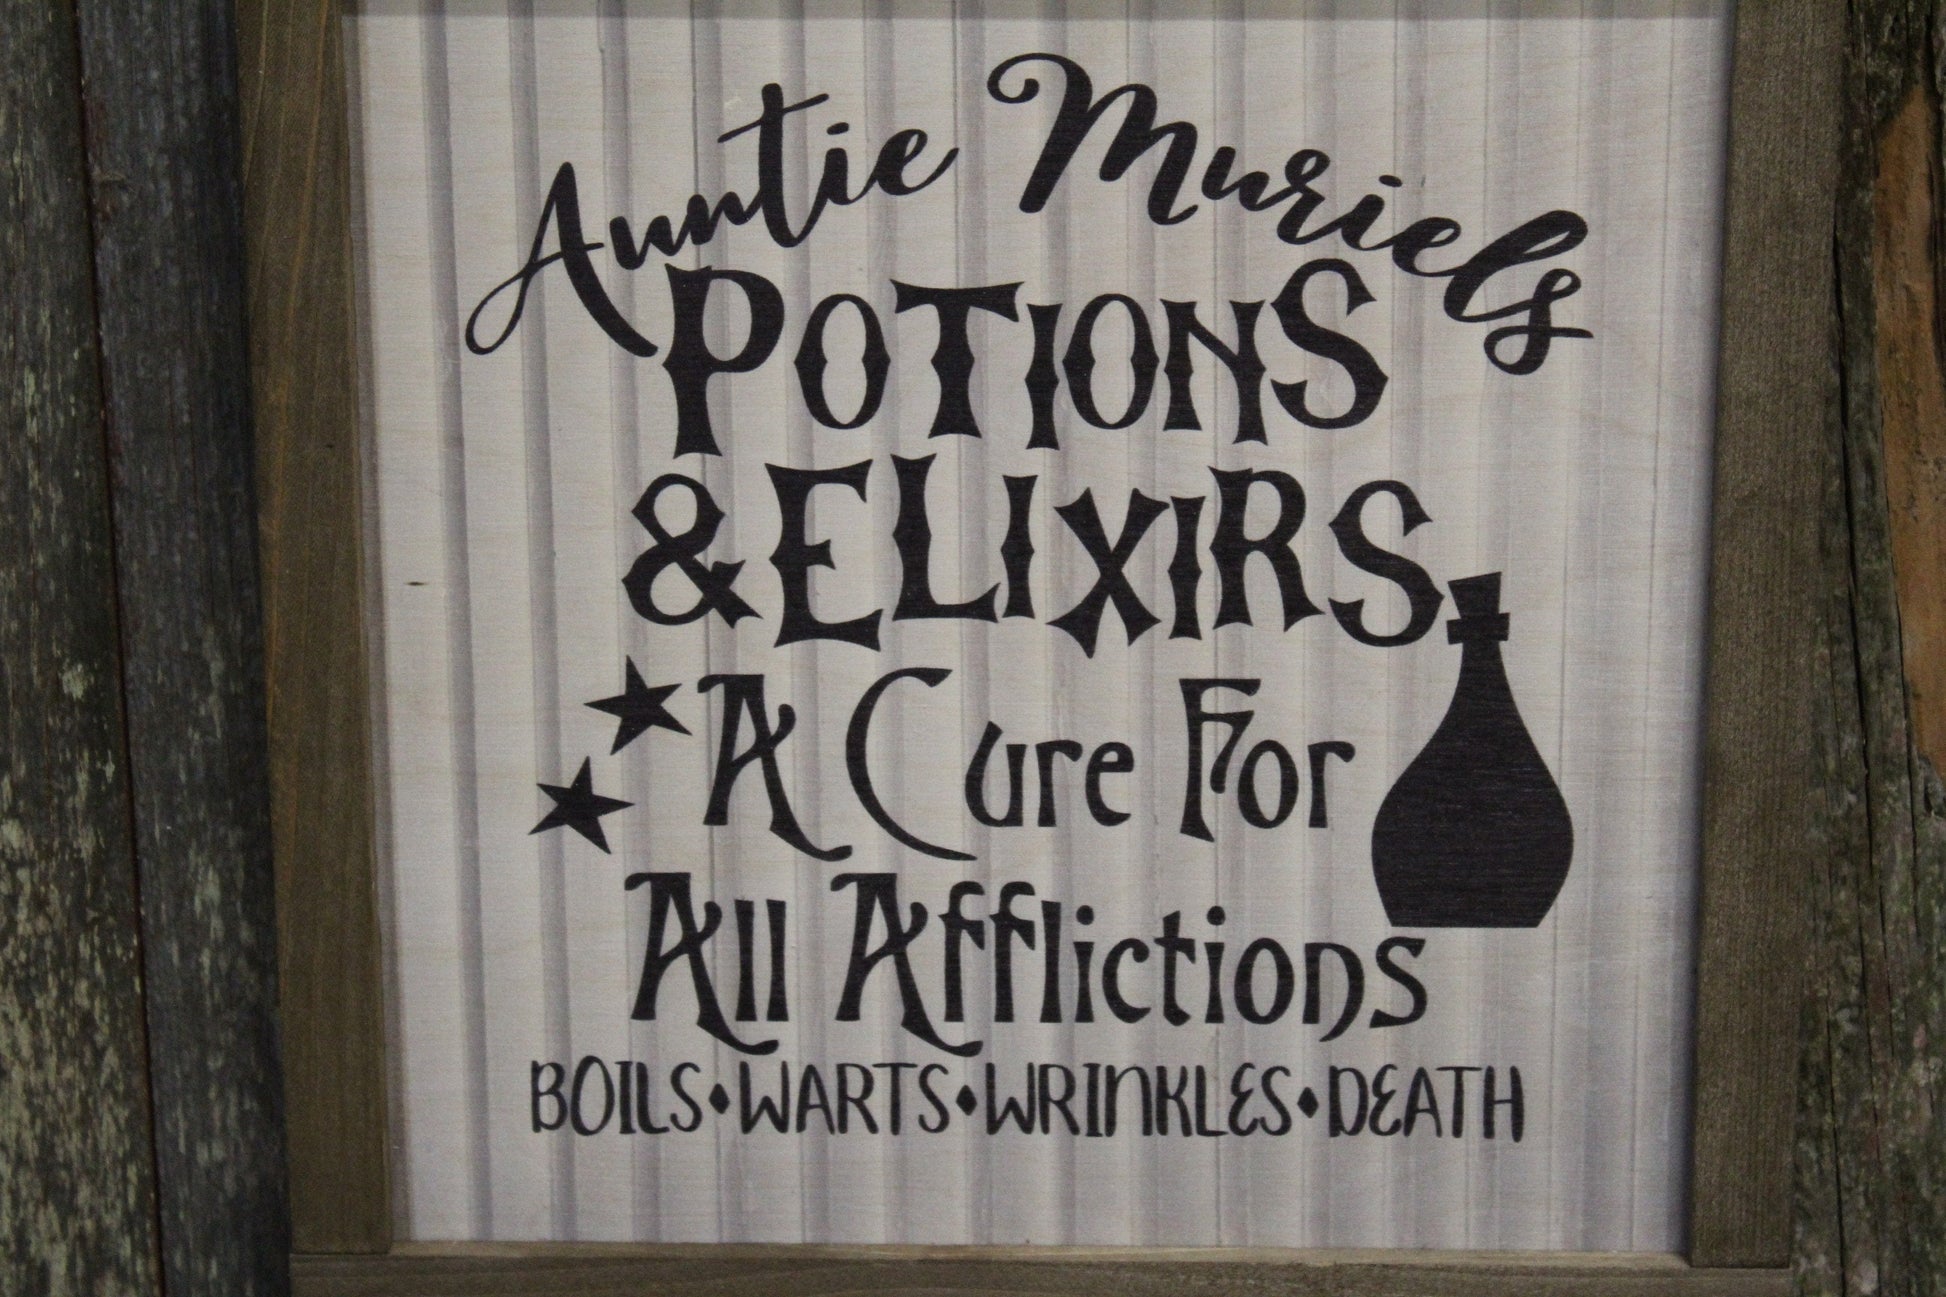 Potions and Elixirs Halloween Wood Sign A Cure For All Afflictions Shiplap Boils Worts Wrinkles Death Funny Art Farmhouse Primitive Rustic